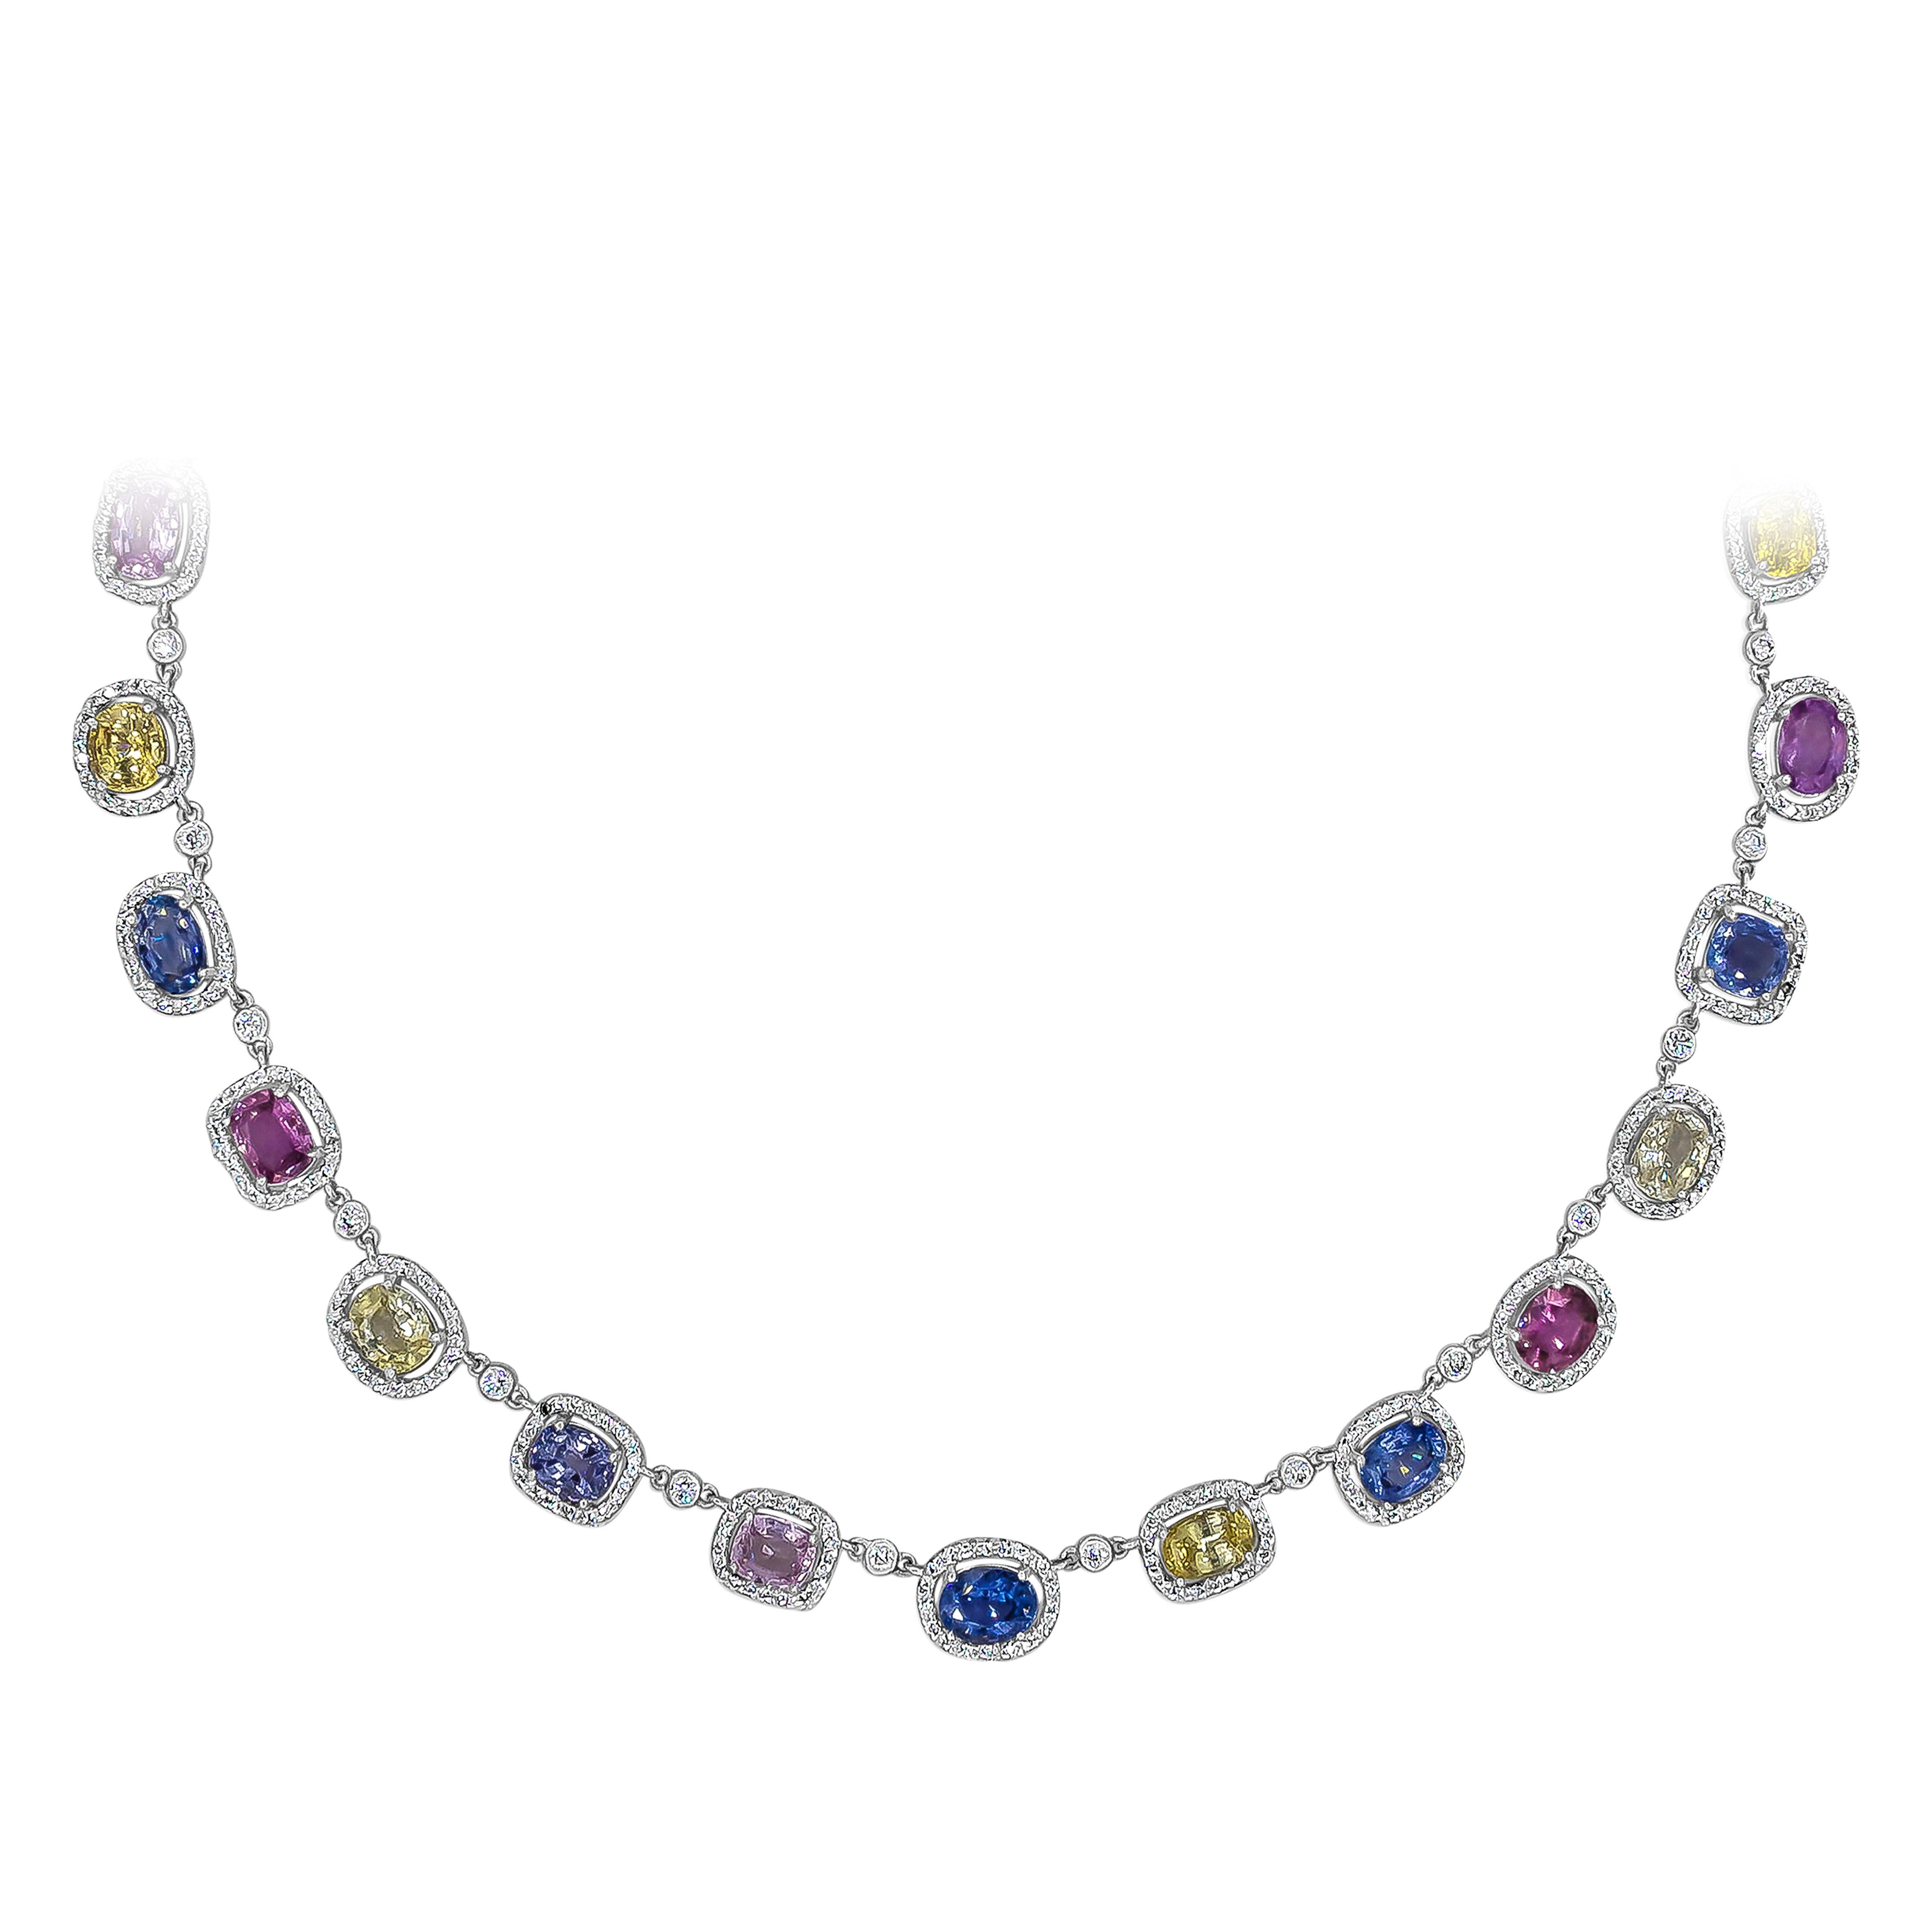 A brilliant jewelry piece showcasing a 37.41 carats total of multi color oval cut sapphires in a halo design and alternately spaced by brilliant round diamonds in a bezel set design. Diamonds weigh 5.55 carats total. Finely made in 18K White Gold